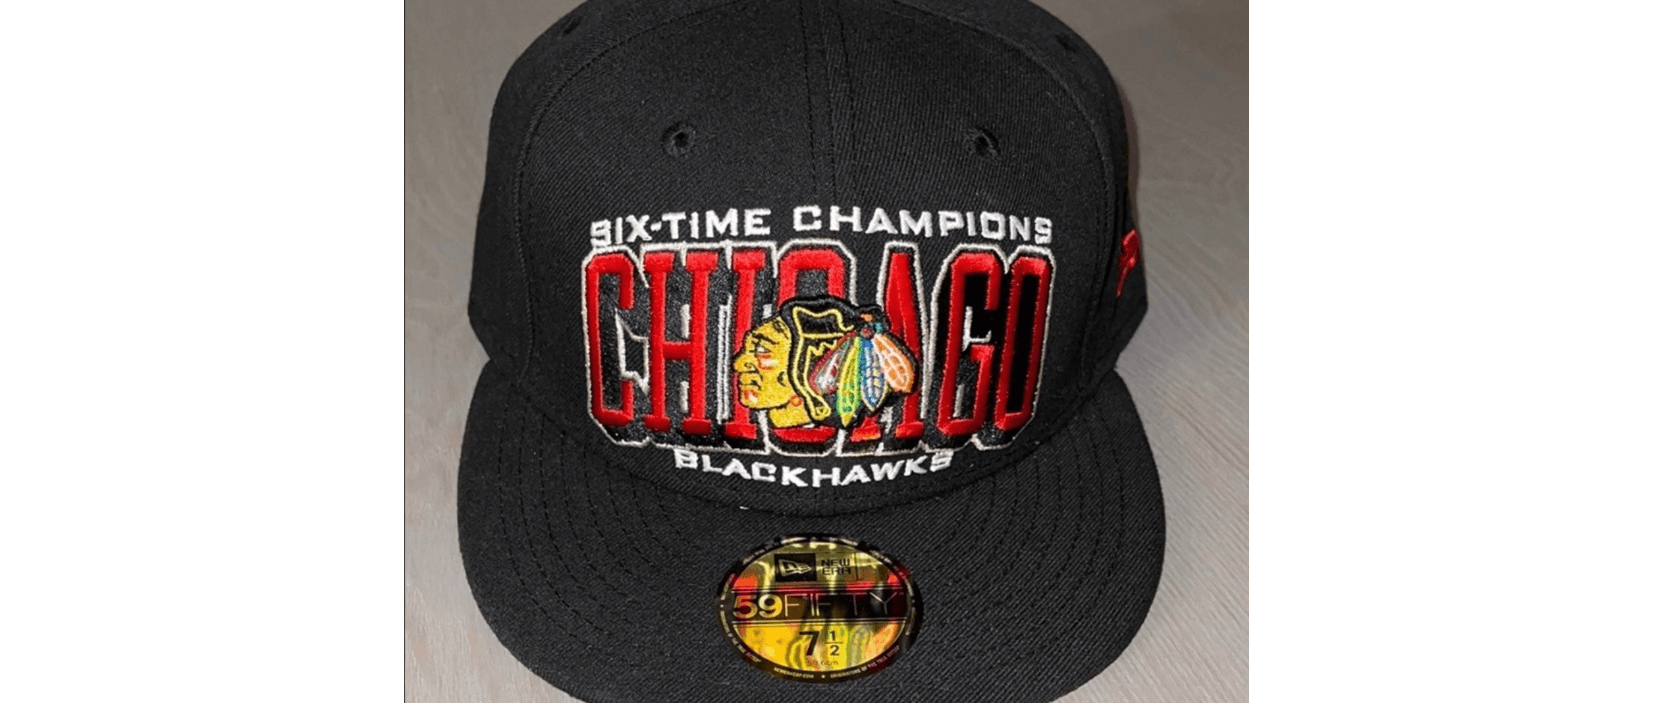 Chicago Blackhawks Men's 59Fifty Six-Time Stanley Cup Champs Arched Hat - Black